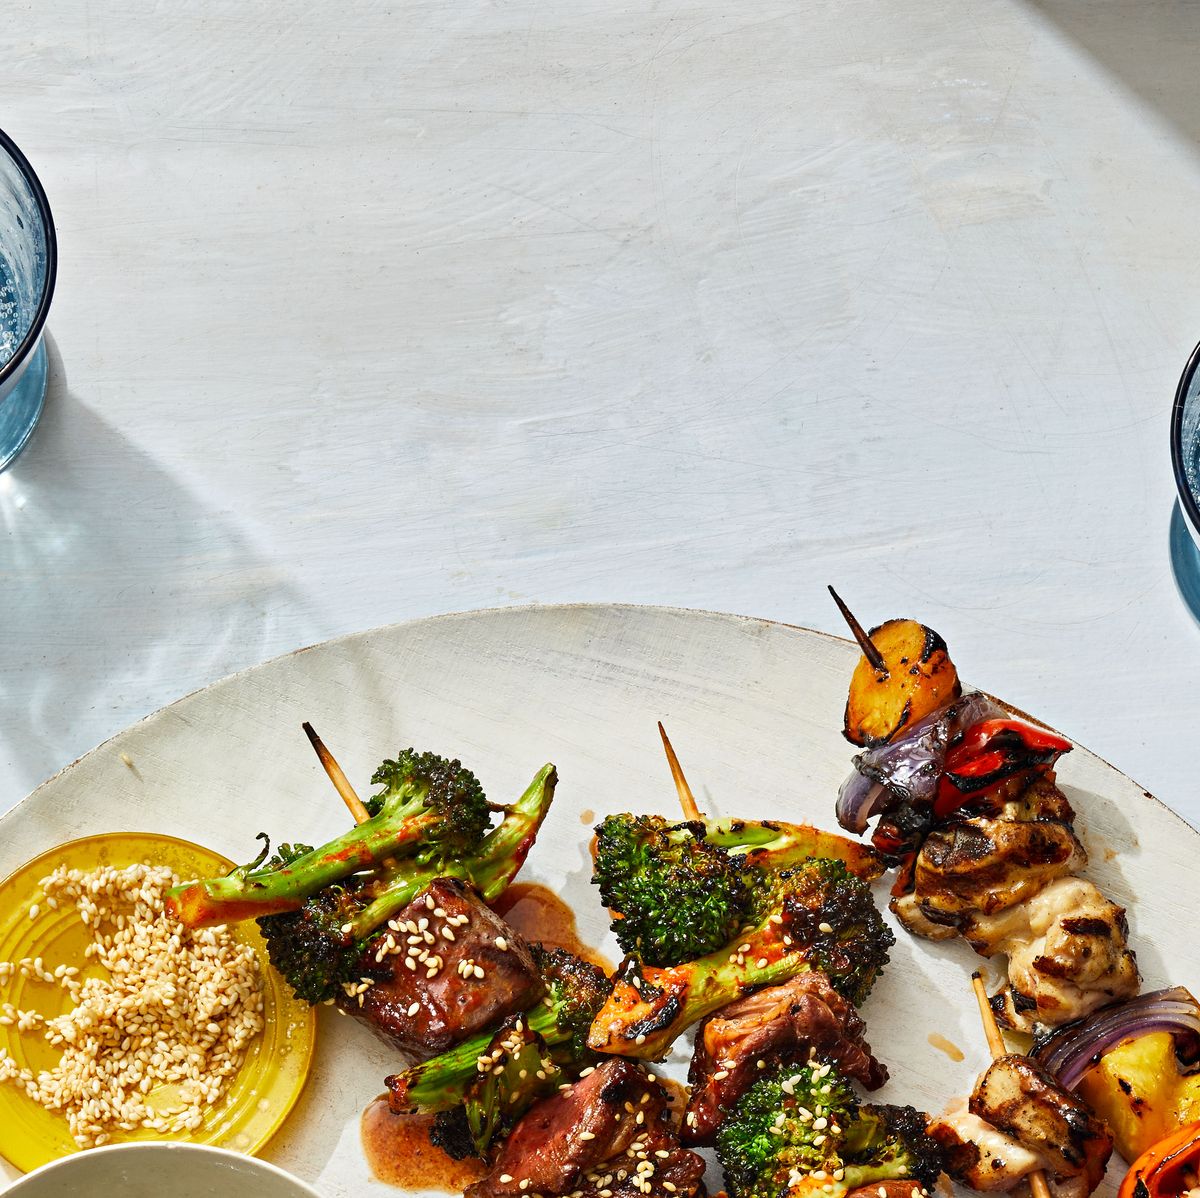 Gochujang minute steak skewers with charred broccolini and lime